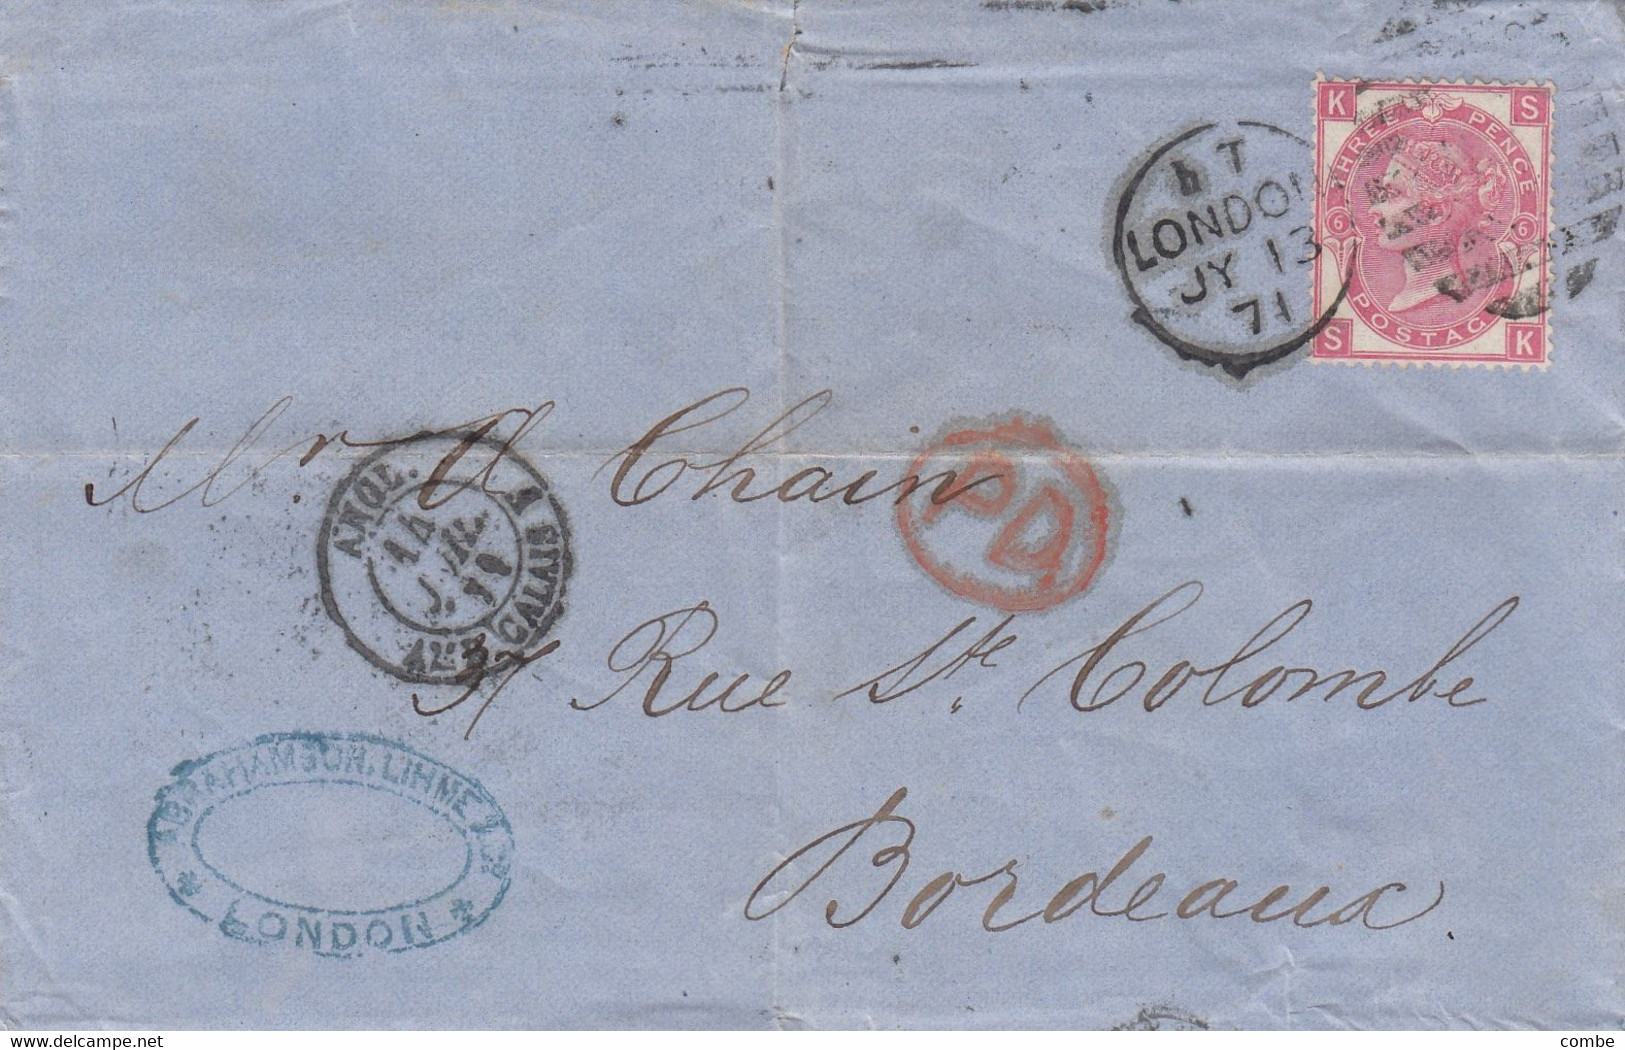 COVER. LONDON. 13 JY 71. TO BORDEAUX. VICTORIA THREE PENCE. KS. PLANCHE 6. PD. ANGL AMB CALAIS - Unclassified